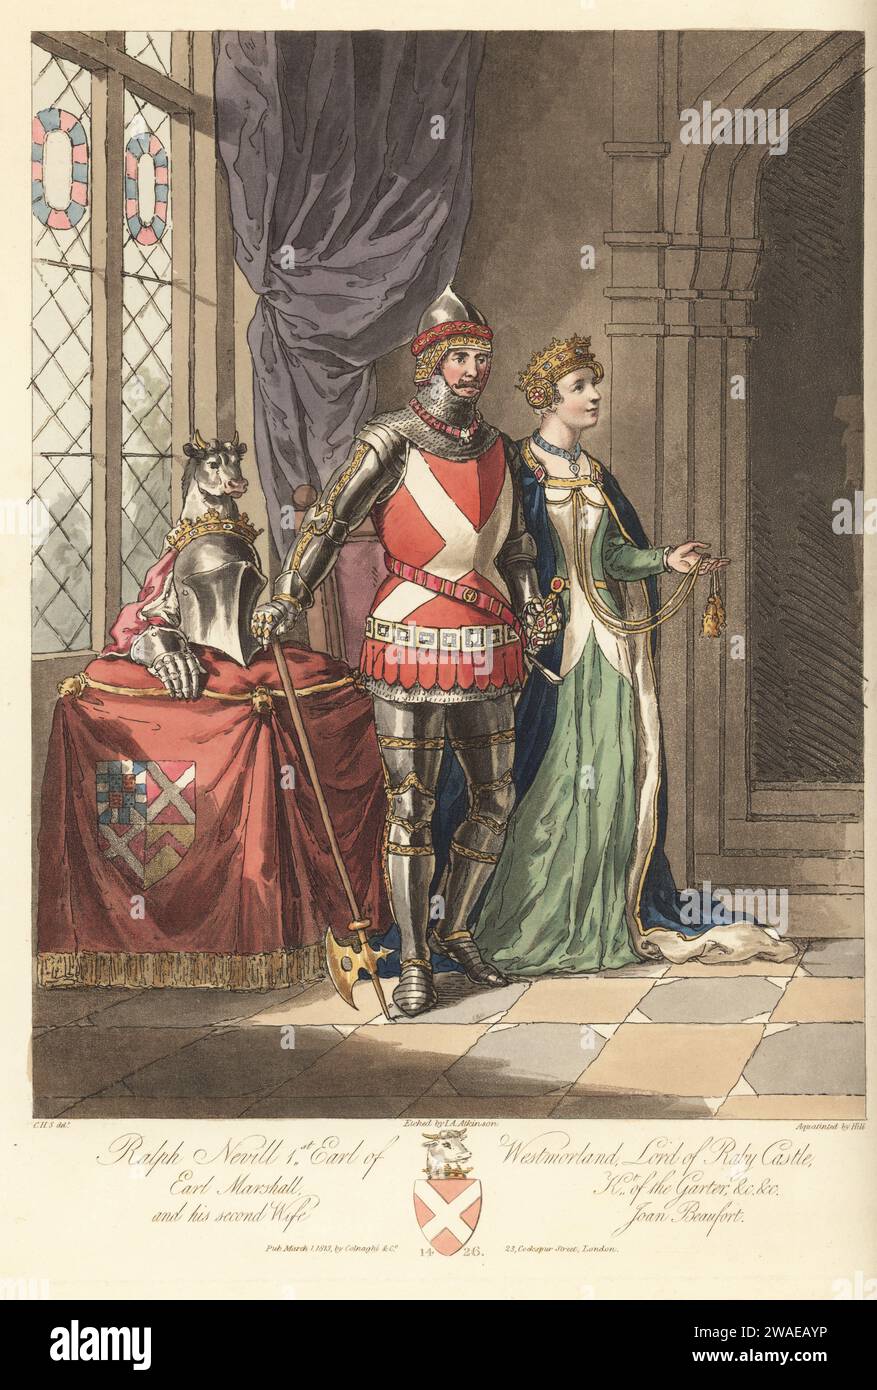 Ralph Neville, 1st Earl of Westmorland, Lord of Raby Castle, Earl Marshall, c.1364-1425. In pointed skullcap, chainmail gorget, suit of plate armour edged with fretwork, armorial surcoat, military girdle, sword belt, battle axe. Tilting helm with bull's head crest on a cushion. With his second wife Joan Beaufort, in coronet, fur-lined mantle, gown, c.1377-1440. From the alabaster tomb effigies in Staindrop Church, Durham. Blazon, Gules, a saltier argent. Handcoloured copperplate engraving etched by John Augustus Atkinson, aquatinted by John Hill, after an illustration by Charles Hamilton Smith Stock Photo